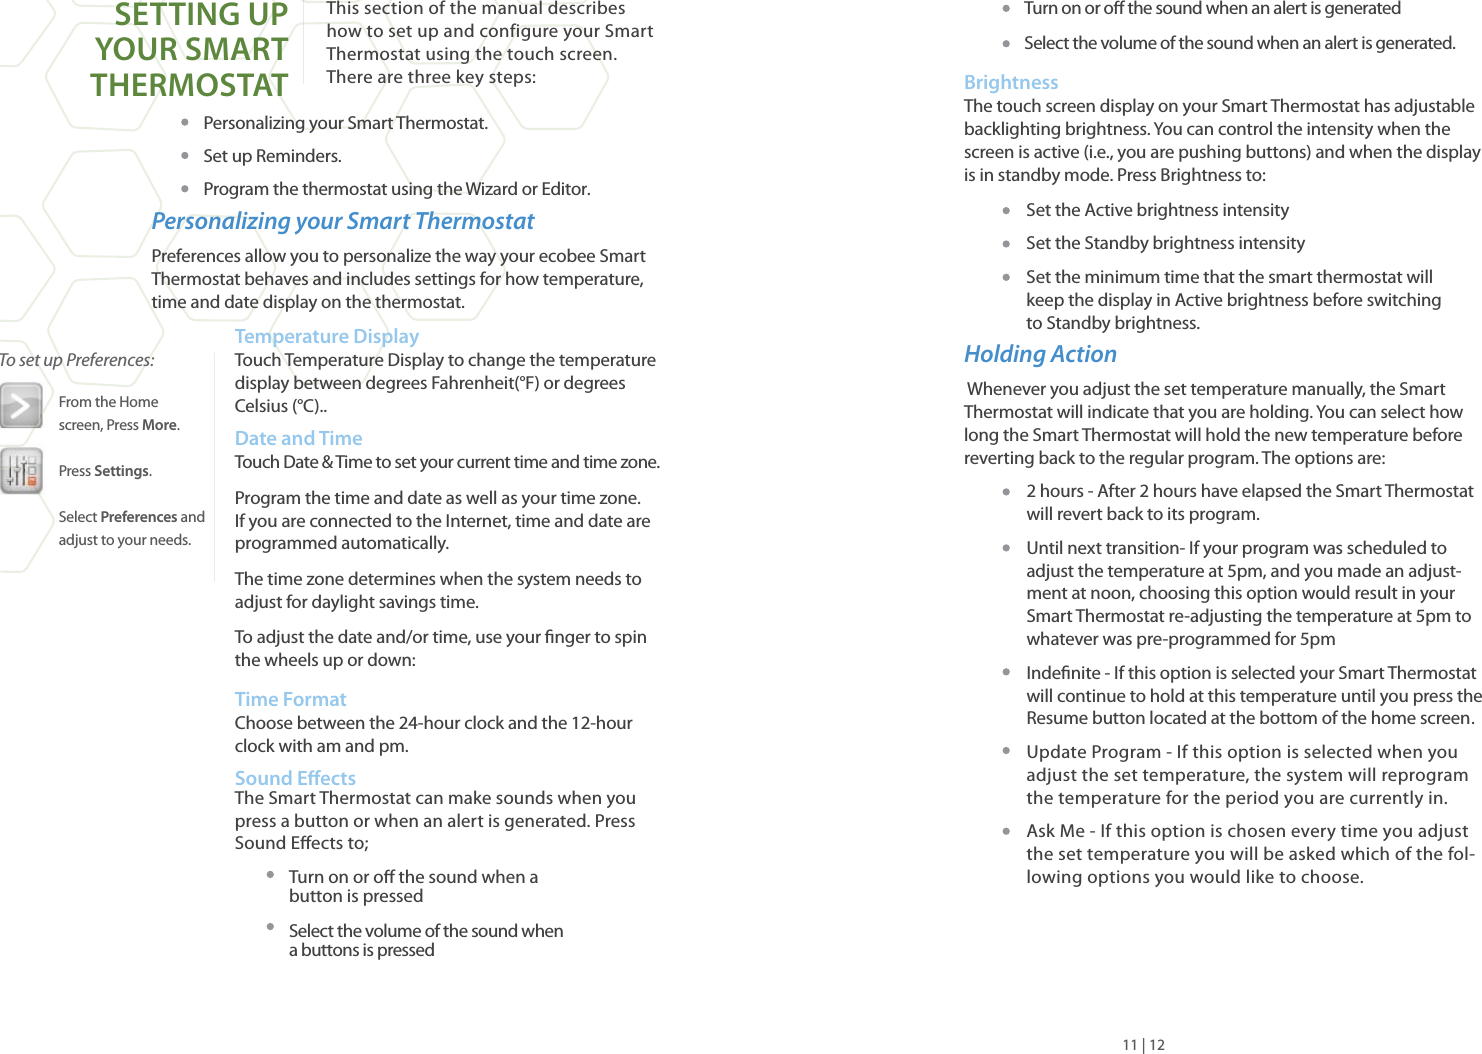 This section of the manual describes how to set up and configure your Smart Thermostat using the touch screen.There are three key steps:Personalizing your Smart Thermostat.Set up Reminders.Program the thermostat using the Wizard or Editor.Personalizing your Smart ThermostatPreferences allow you to personalize the way your ecobee Smart Thermostat behaves and includes settings for how temperature, time and date display on the thermostat.Temperature Display Touch Temperature Display to change the temperature display between degrees Fahrenheit(°F) or degrees Celsius (°C)..Date and TimeTouch Date &amp; Time to set your current time and time zone. Program the time and date as well as your time zone. If you are connected to the Internet, time and date are programmed automatically.The time zone determines when the system needs to adjust for daylight savings time. To adjust the date and/or time, use your nger to spin the wheels up or down:     Time FormatChoose between the 24-hour clock and the 12-hour clock with am and pm.Sound EectsThe Smart Thermostat can make sounds when you press a button or when an alert is generated. Press Sound Eects to;Turn on or o the sound when a button is pressedSelect the volume of the sound when a buttons is pressedTurn on or o the sound when an alert is generatedSelect the volume of the sound when an alert is generated.Brightness The touch screen display on your Smart Thermostat has adjustable backlighting brightness. You can control the intensity when the screen is active (i.e., you are pushing buttons) and when the display is in standby mode. Press Brightness to:Set the Active brightness intensitySet the Standby brightness intensitySet the minimum time that the smart thermostat will keep the display in Active brightness before switchingto Standby brightness.Holding Action  Whenever you adjust the set temperature manually, the Smart Thermostat will indicate that you are holding. You can select how long the Smart Thermostat will hold the new temperature before reverting back to the regular program. The options are:2 hours - After 2 hours have elapsed the Smart Thermostat will revert back to its program.Until next transition- If your program was scheduled to adjust the temperature at 5pm, and you made an adjust-ment at noon, choosing this option would result in your Smart Thermostat re-adjusting the temperature at 5pm to whatever was pre-programmed for 5pmIndenite - If this option is selected your Smart Thermostat will continue to hold at this temperature until you press the Resume button located at the bottom of the home screen.Update Program - If this option is selected when you adjust the set temperature, the system will reprogram the temperature for the period you are currently in. Ask Me - If this option is chosen every time you adjust the set temperature you will be asked which of the fol-lowing options you would like to choose.To set up Preferences:From the Homescreen, Press More.Press Settings.Select Preferences and adjust to your needs.11 | 12SETTING UP YOUR SMARTTHERMOSTAT